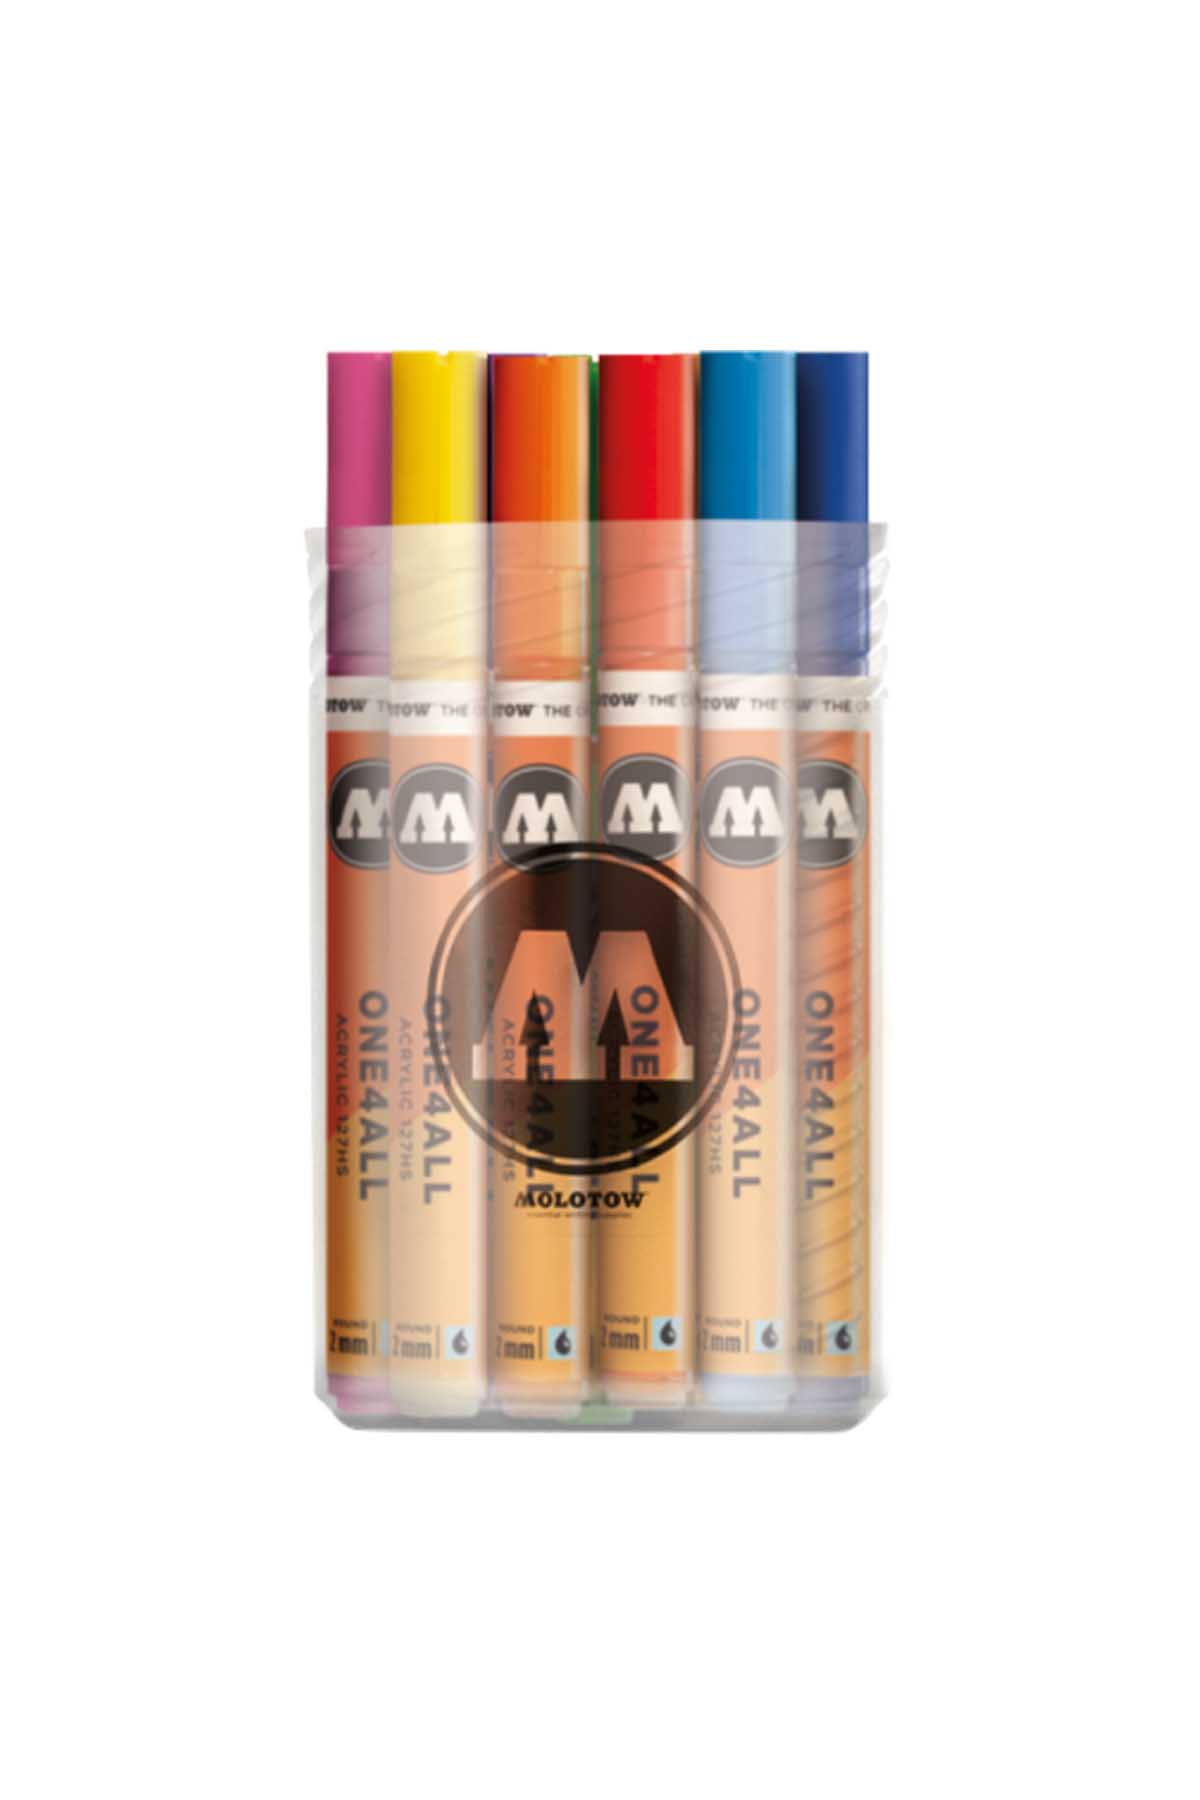 Molotow ONE4ALL 127HS MARKER Main Set 1